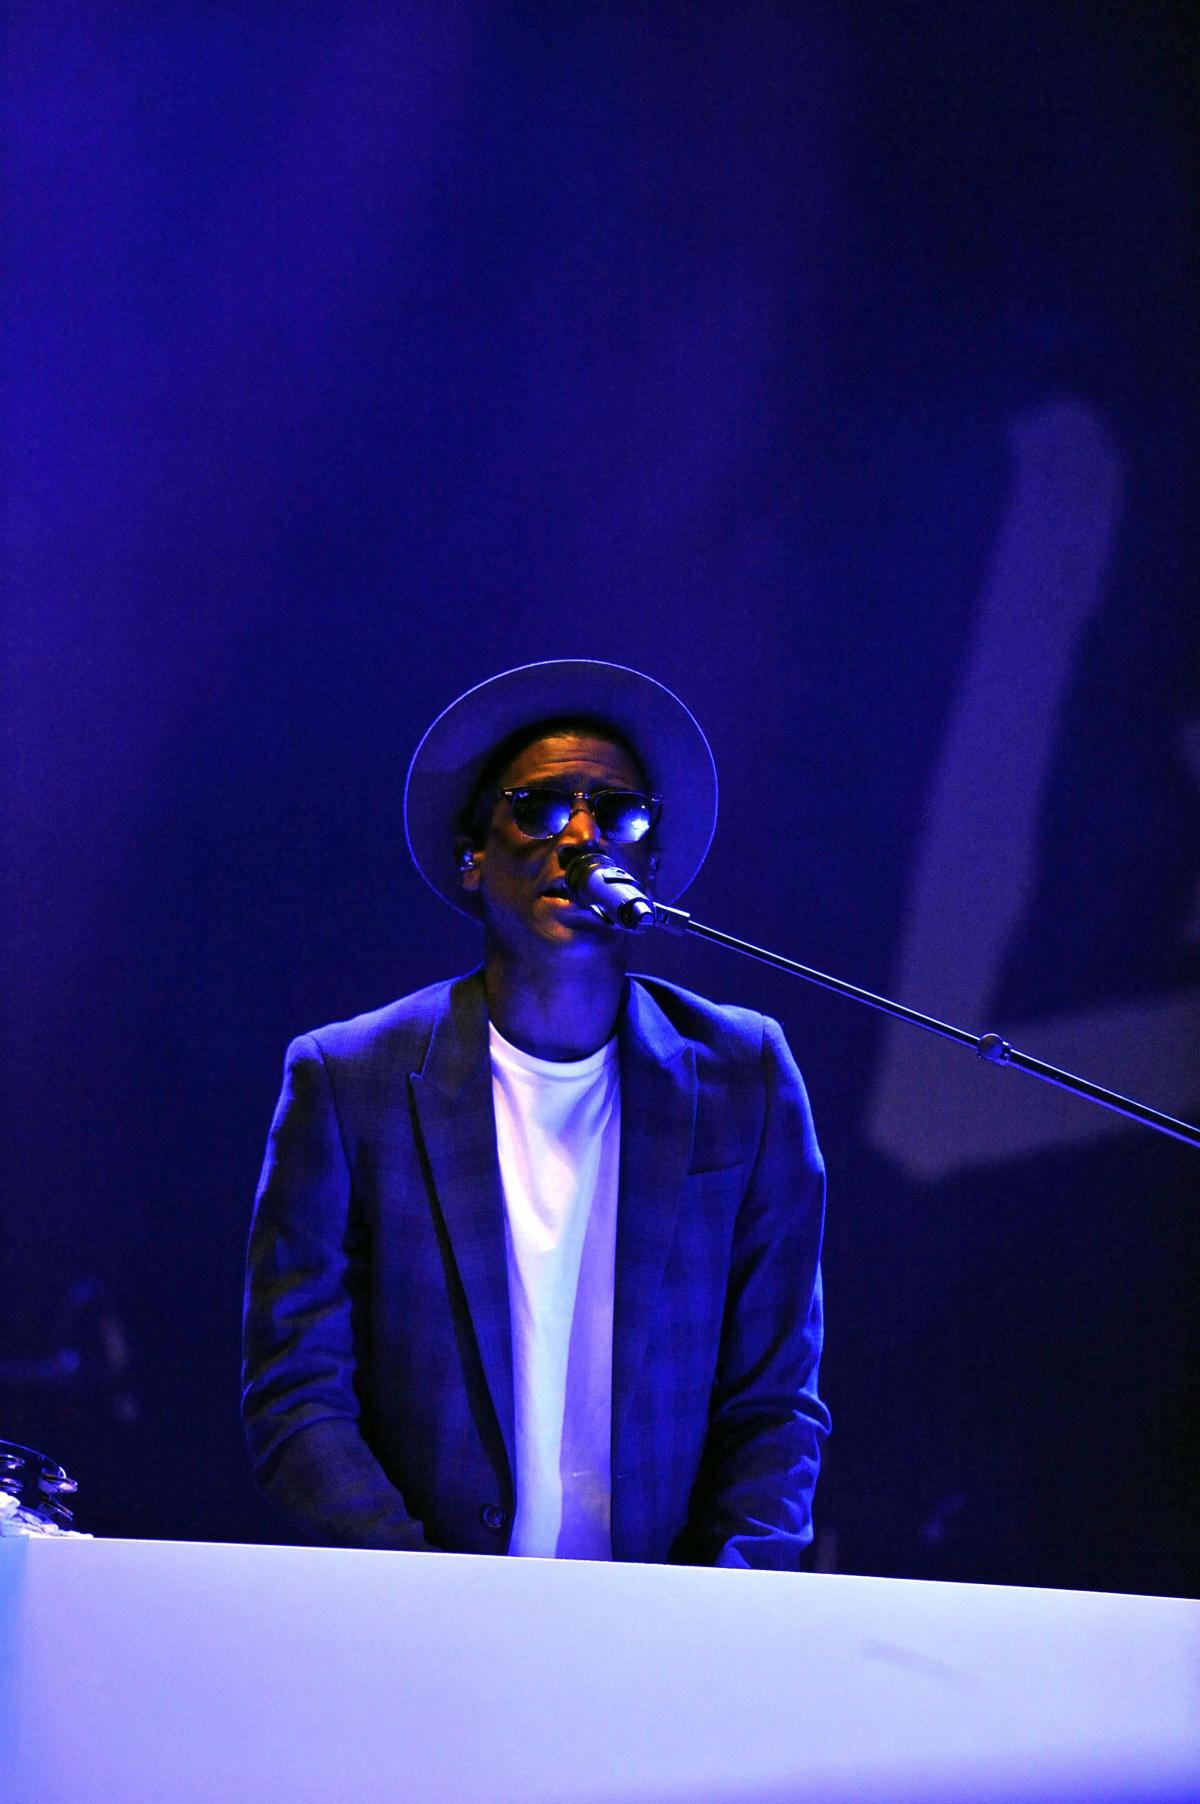 Labrinth on stage at Bingley Music Live 2015